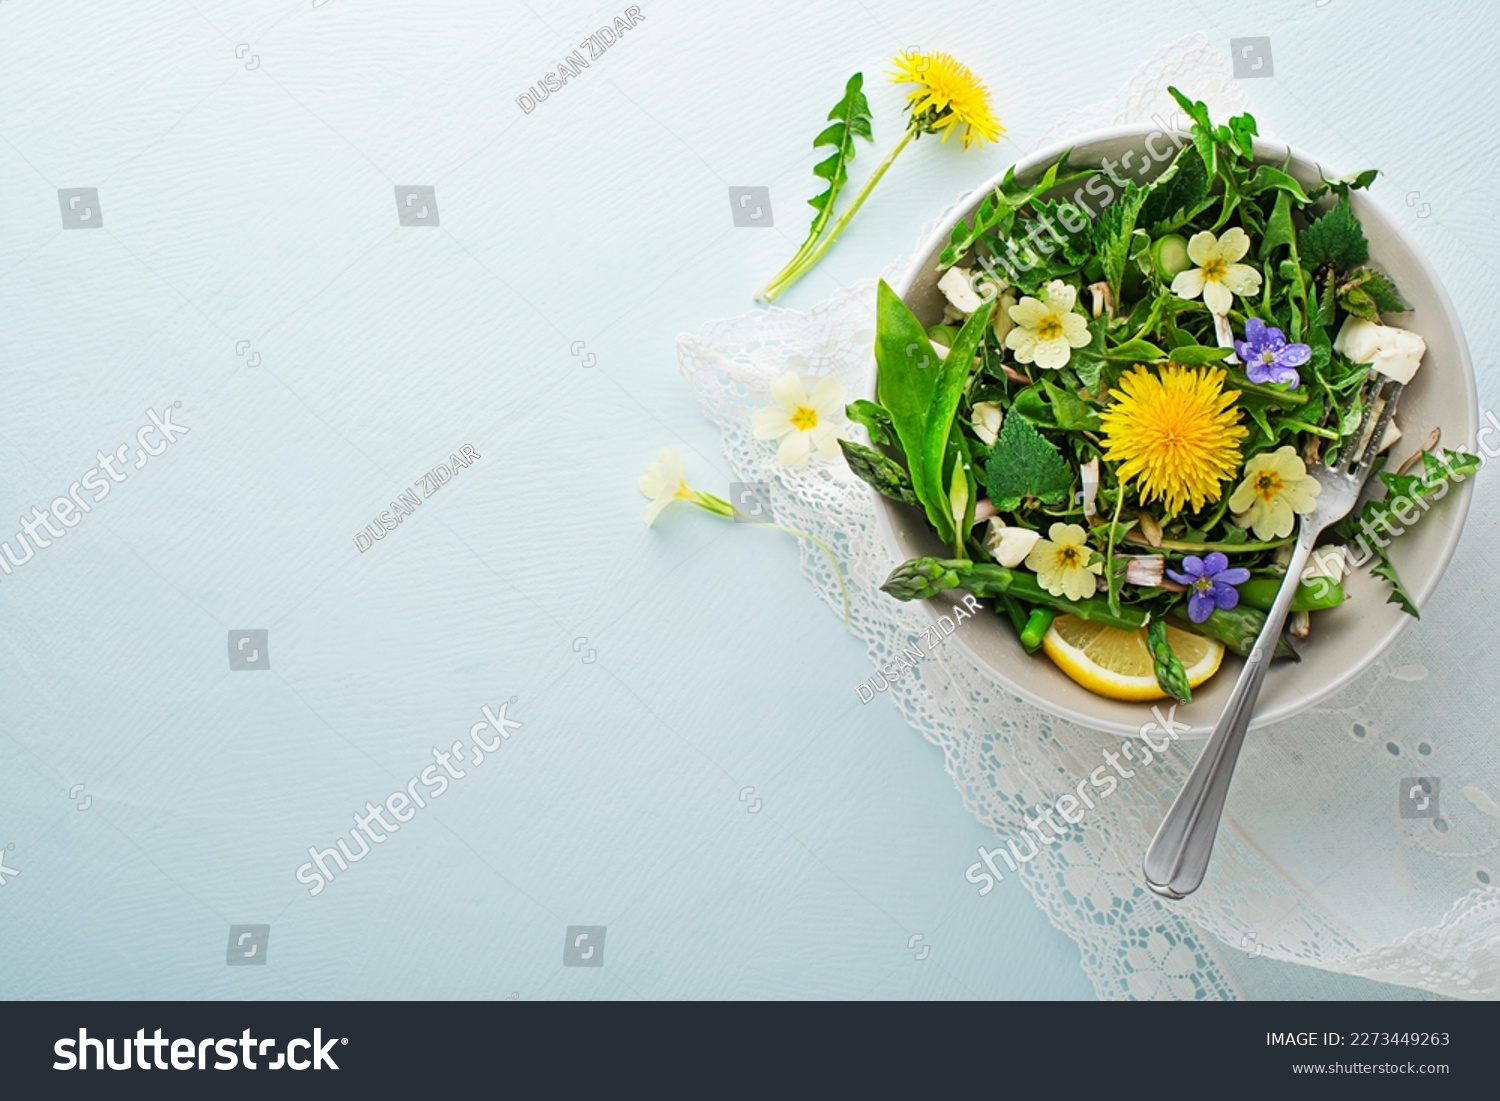 Spring salad with dandelion, asparagus, wild garlic, flowers, nettle and cream cheese. Healthy spring detox food ingredients. #2273449263